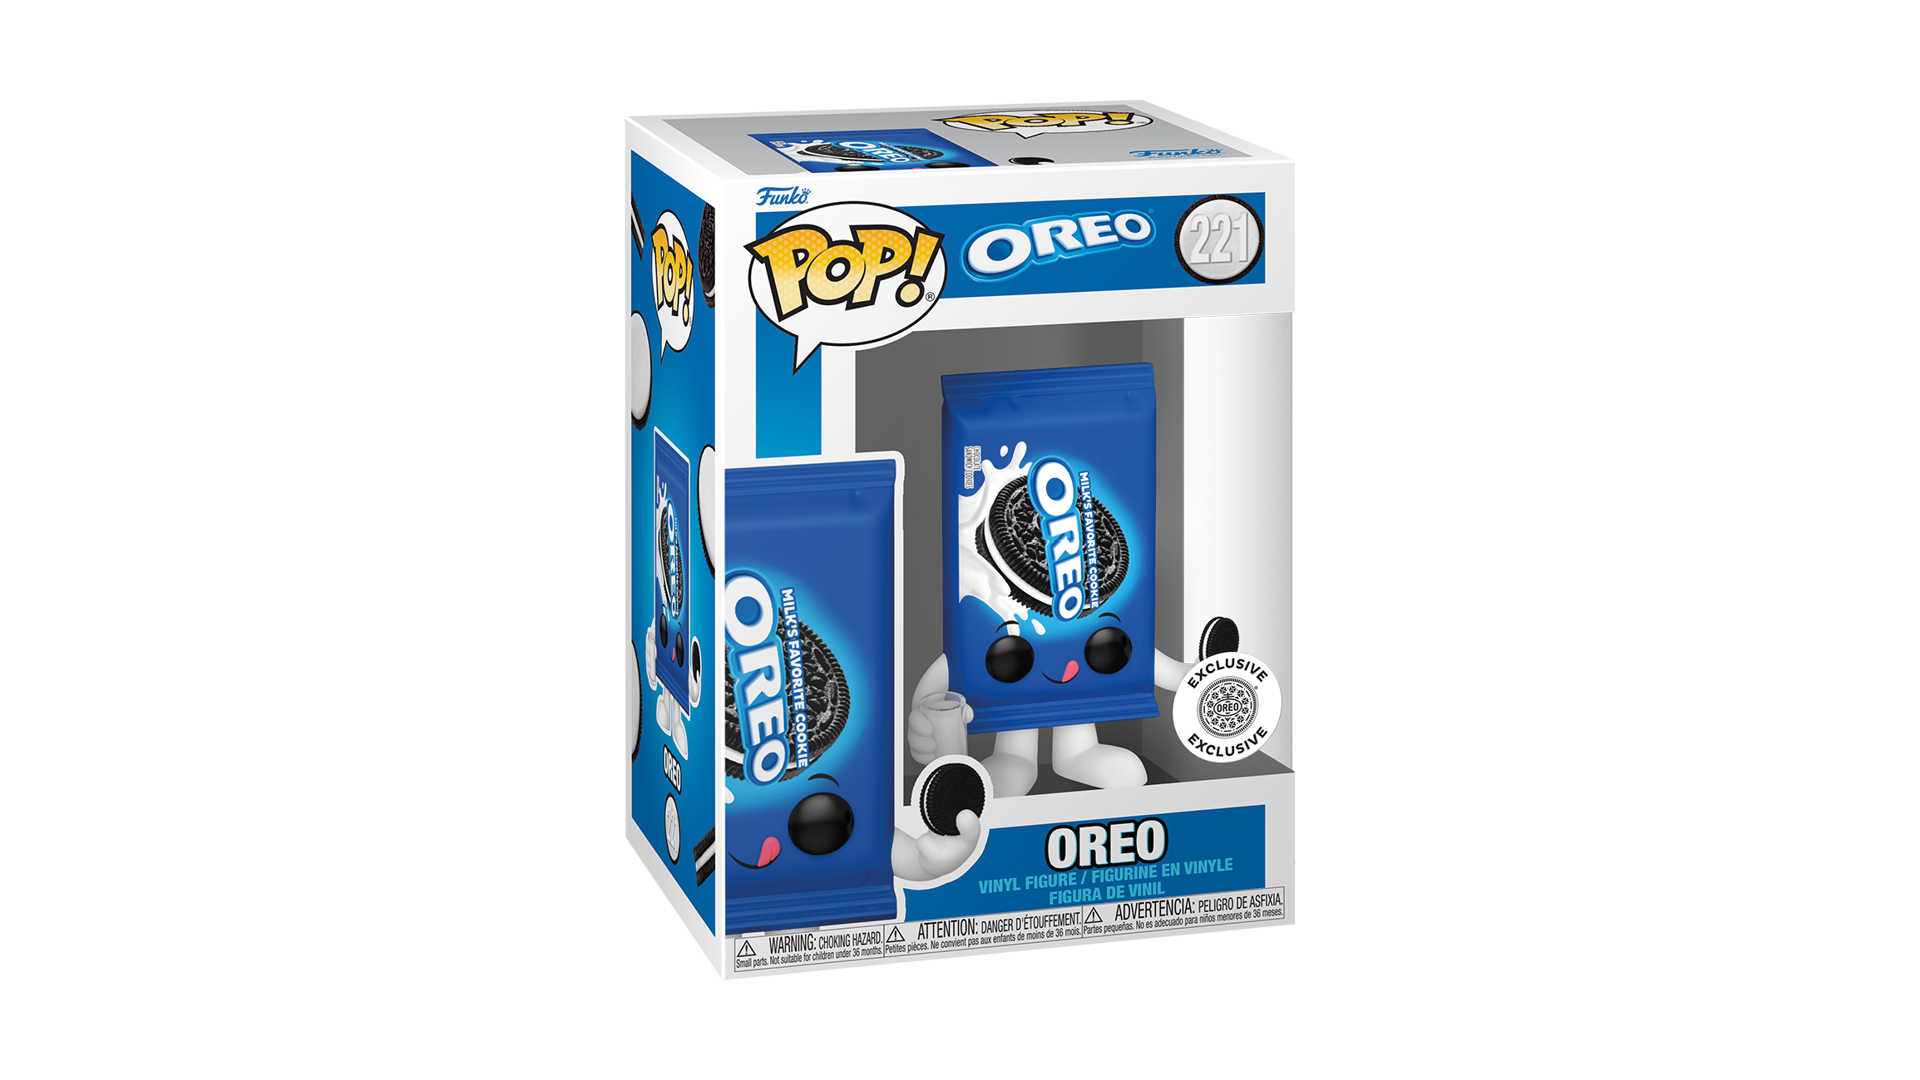 Find Fun, Creative Funko Pop Rugby Action Figure and Toys For All